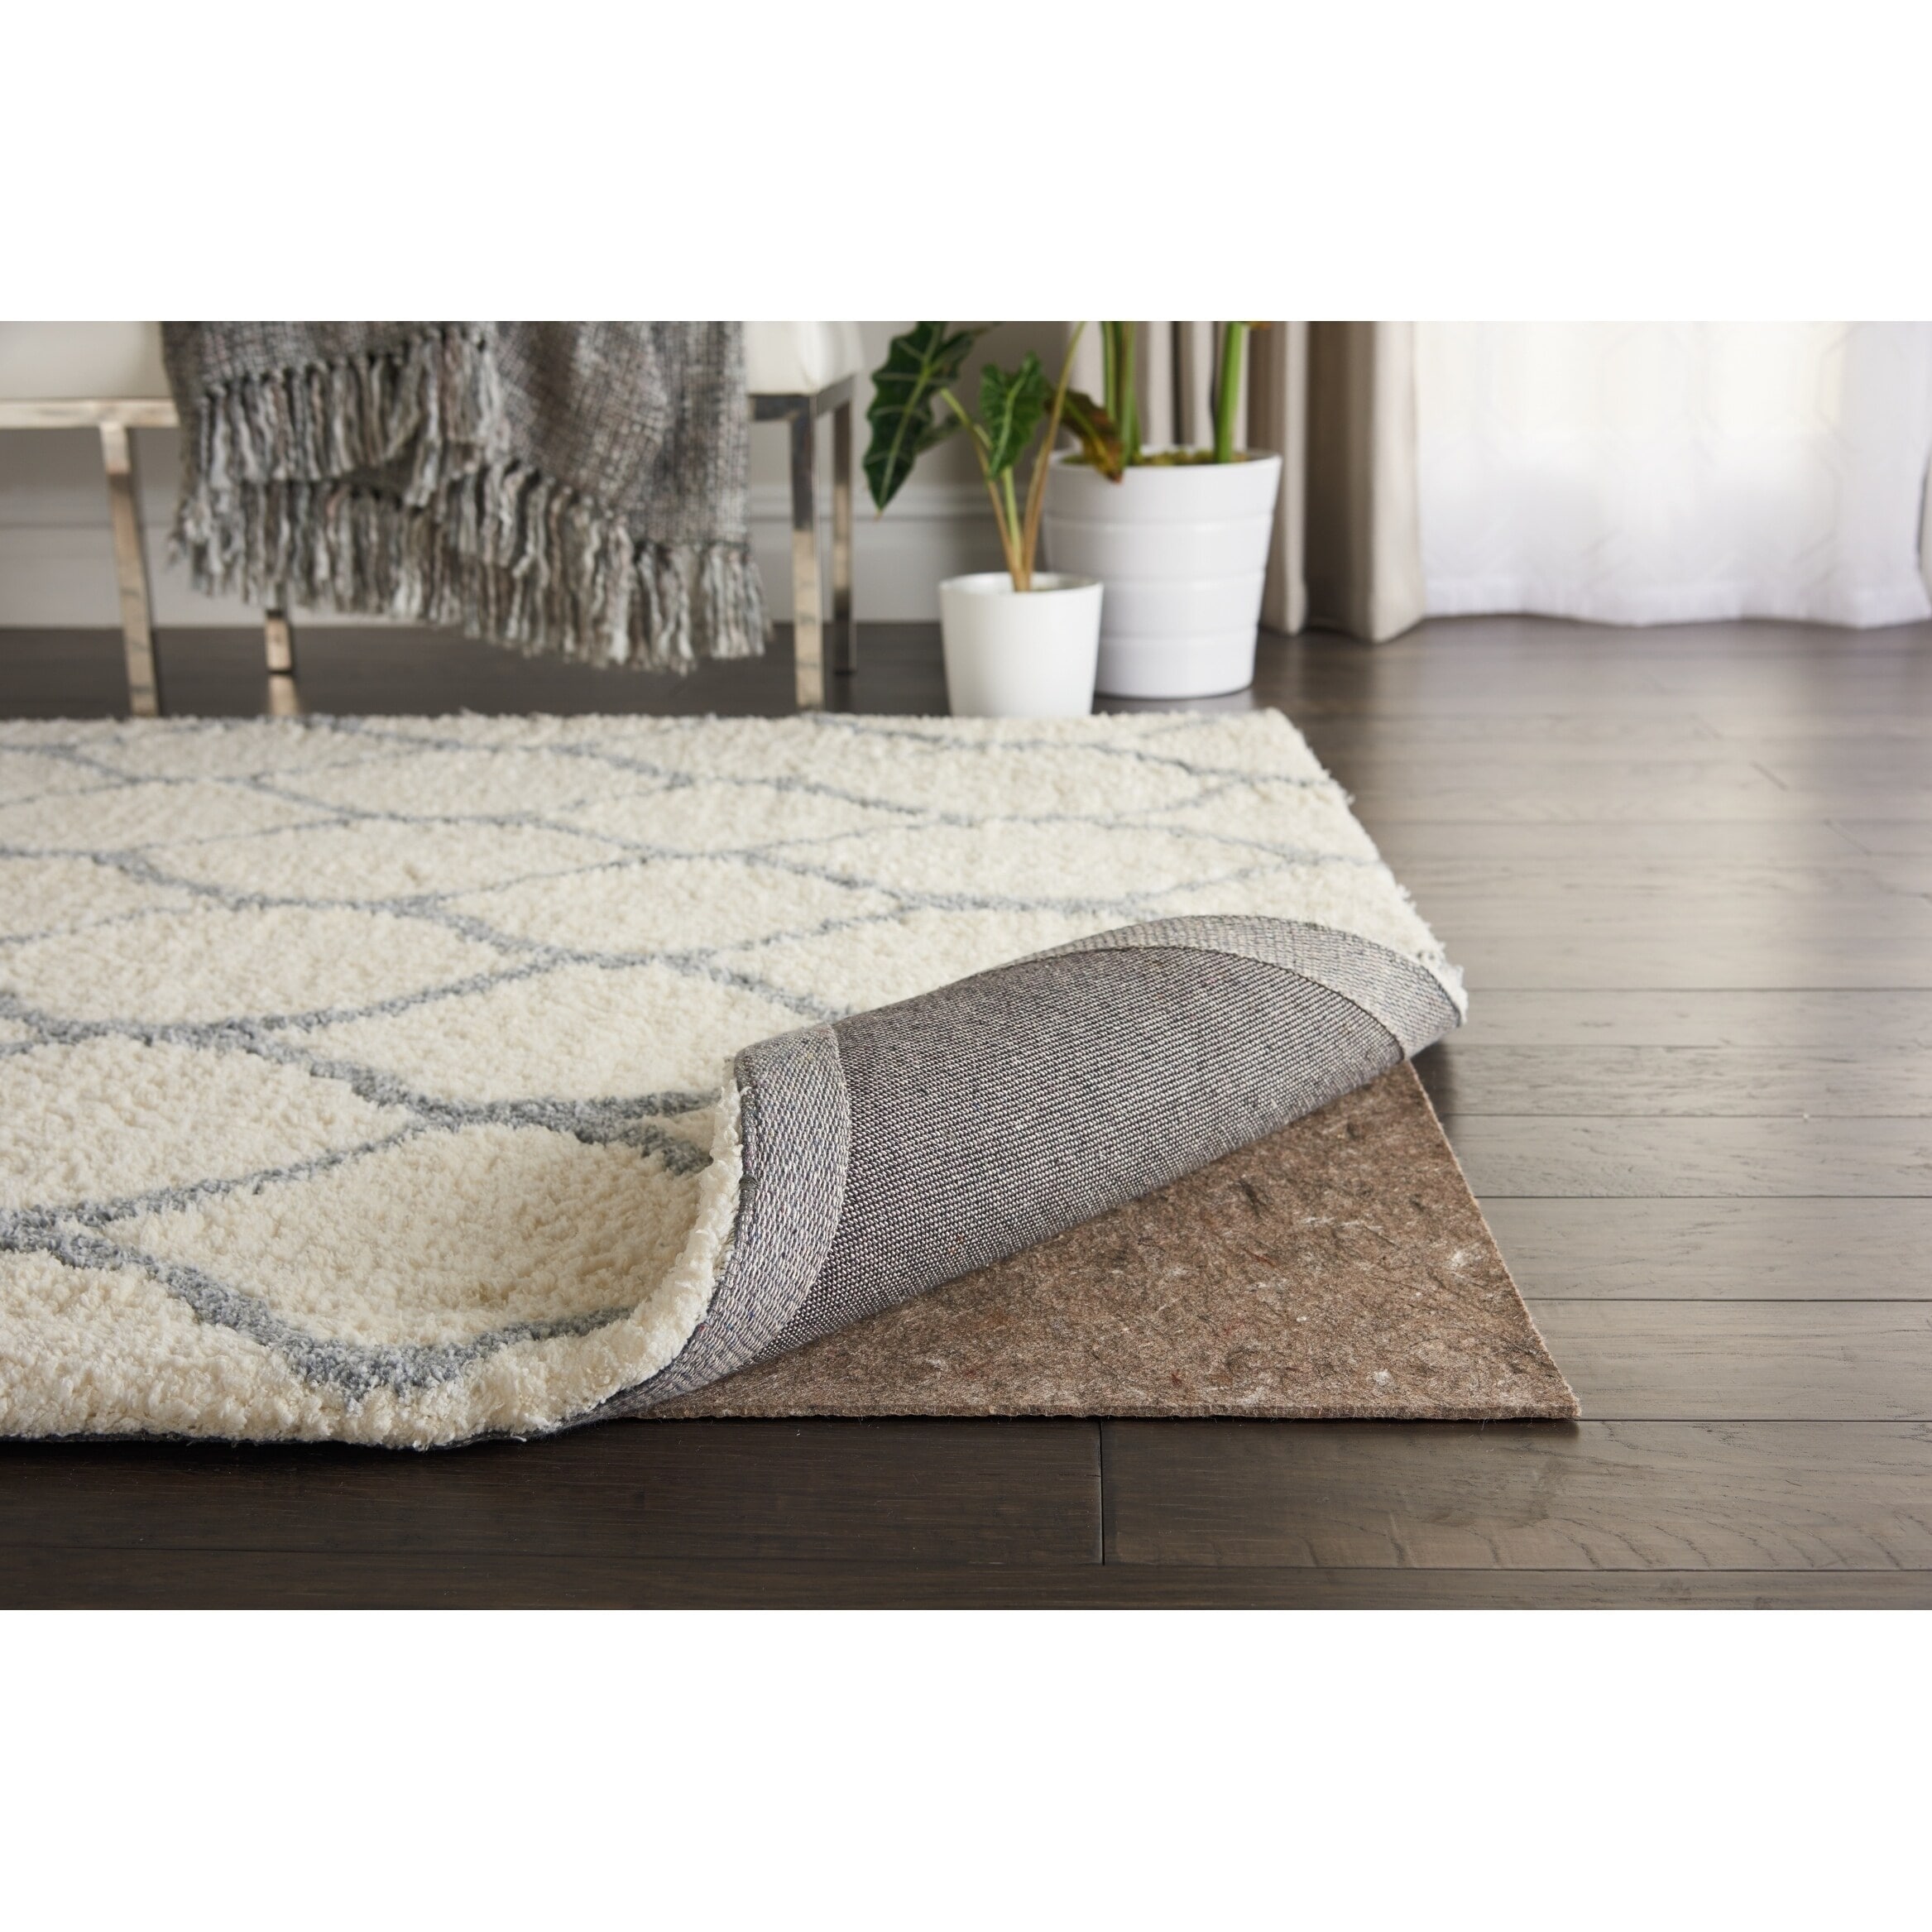 https://ak1.ostkcdn.com/images/products/is/images/direct/7f8bfd6c5b4531b5f77e4aa912b1182042675f3d/Nourison-Reversible-Non-Slip-Dual-Surface-Rug-Pad.jpg